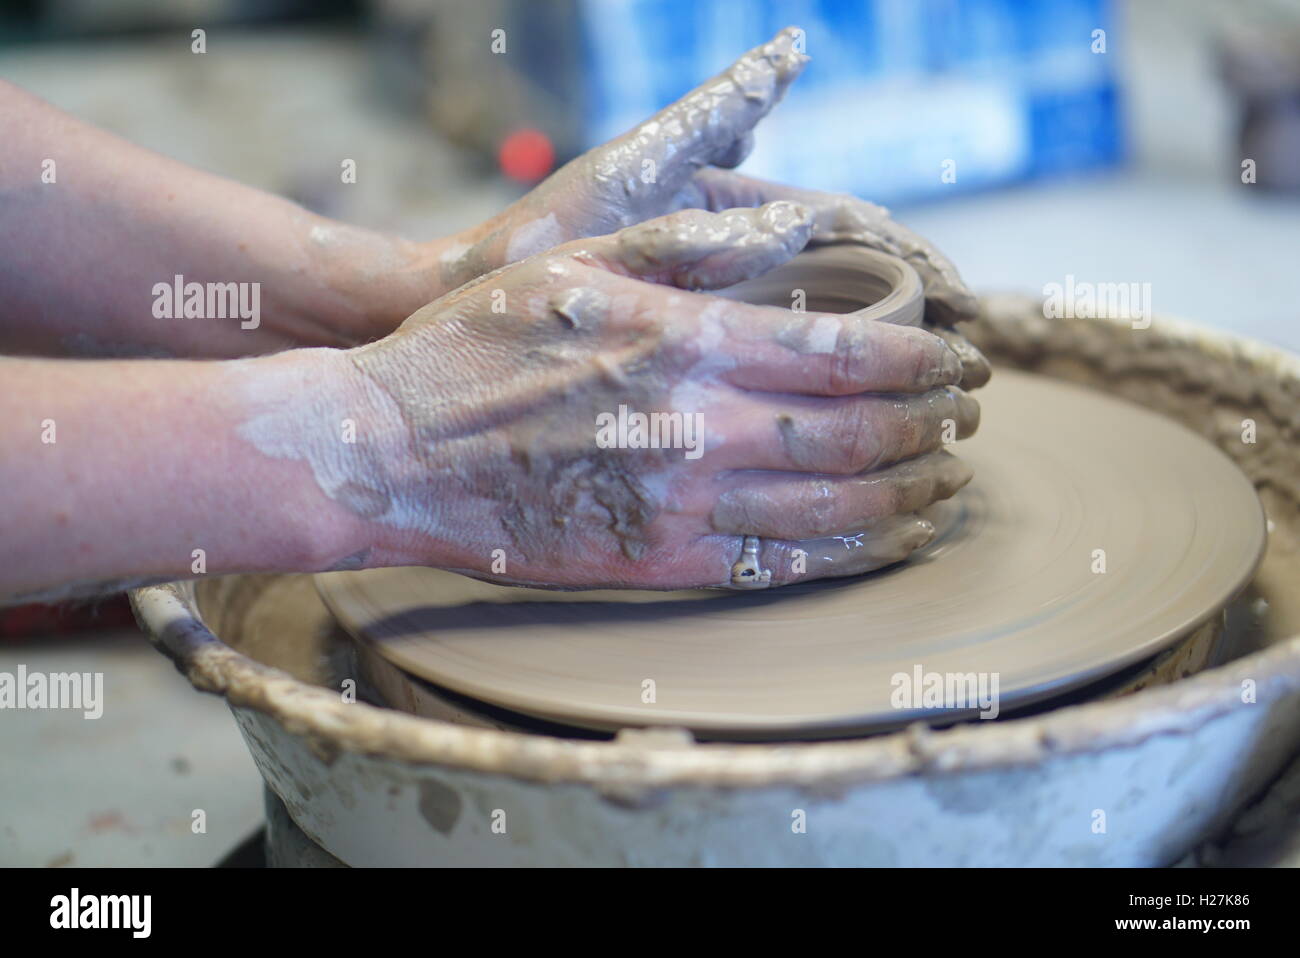 Close-up of female mature student's hands during a pottery class Stock Photo